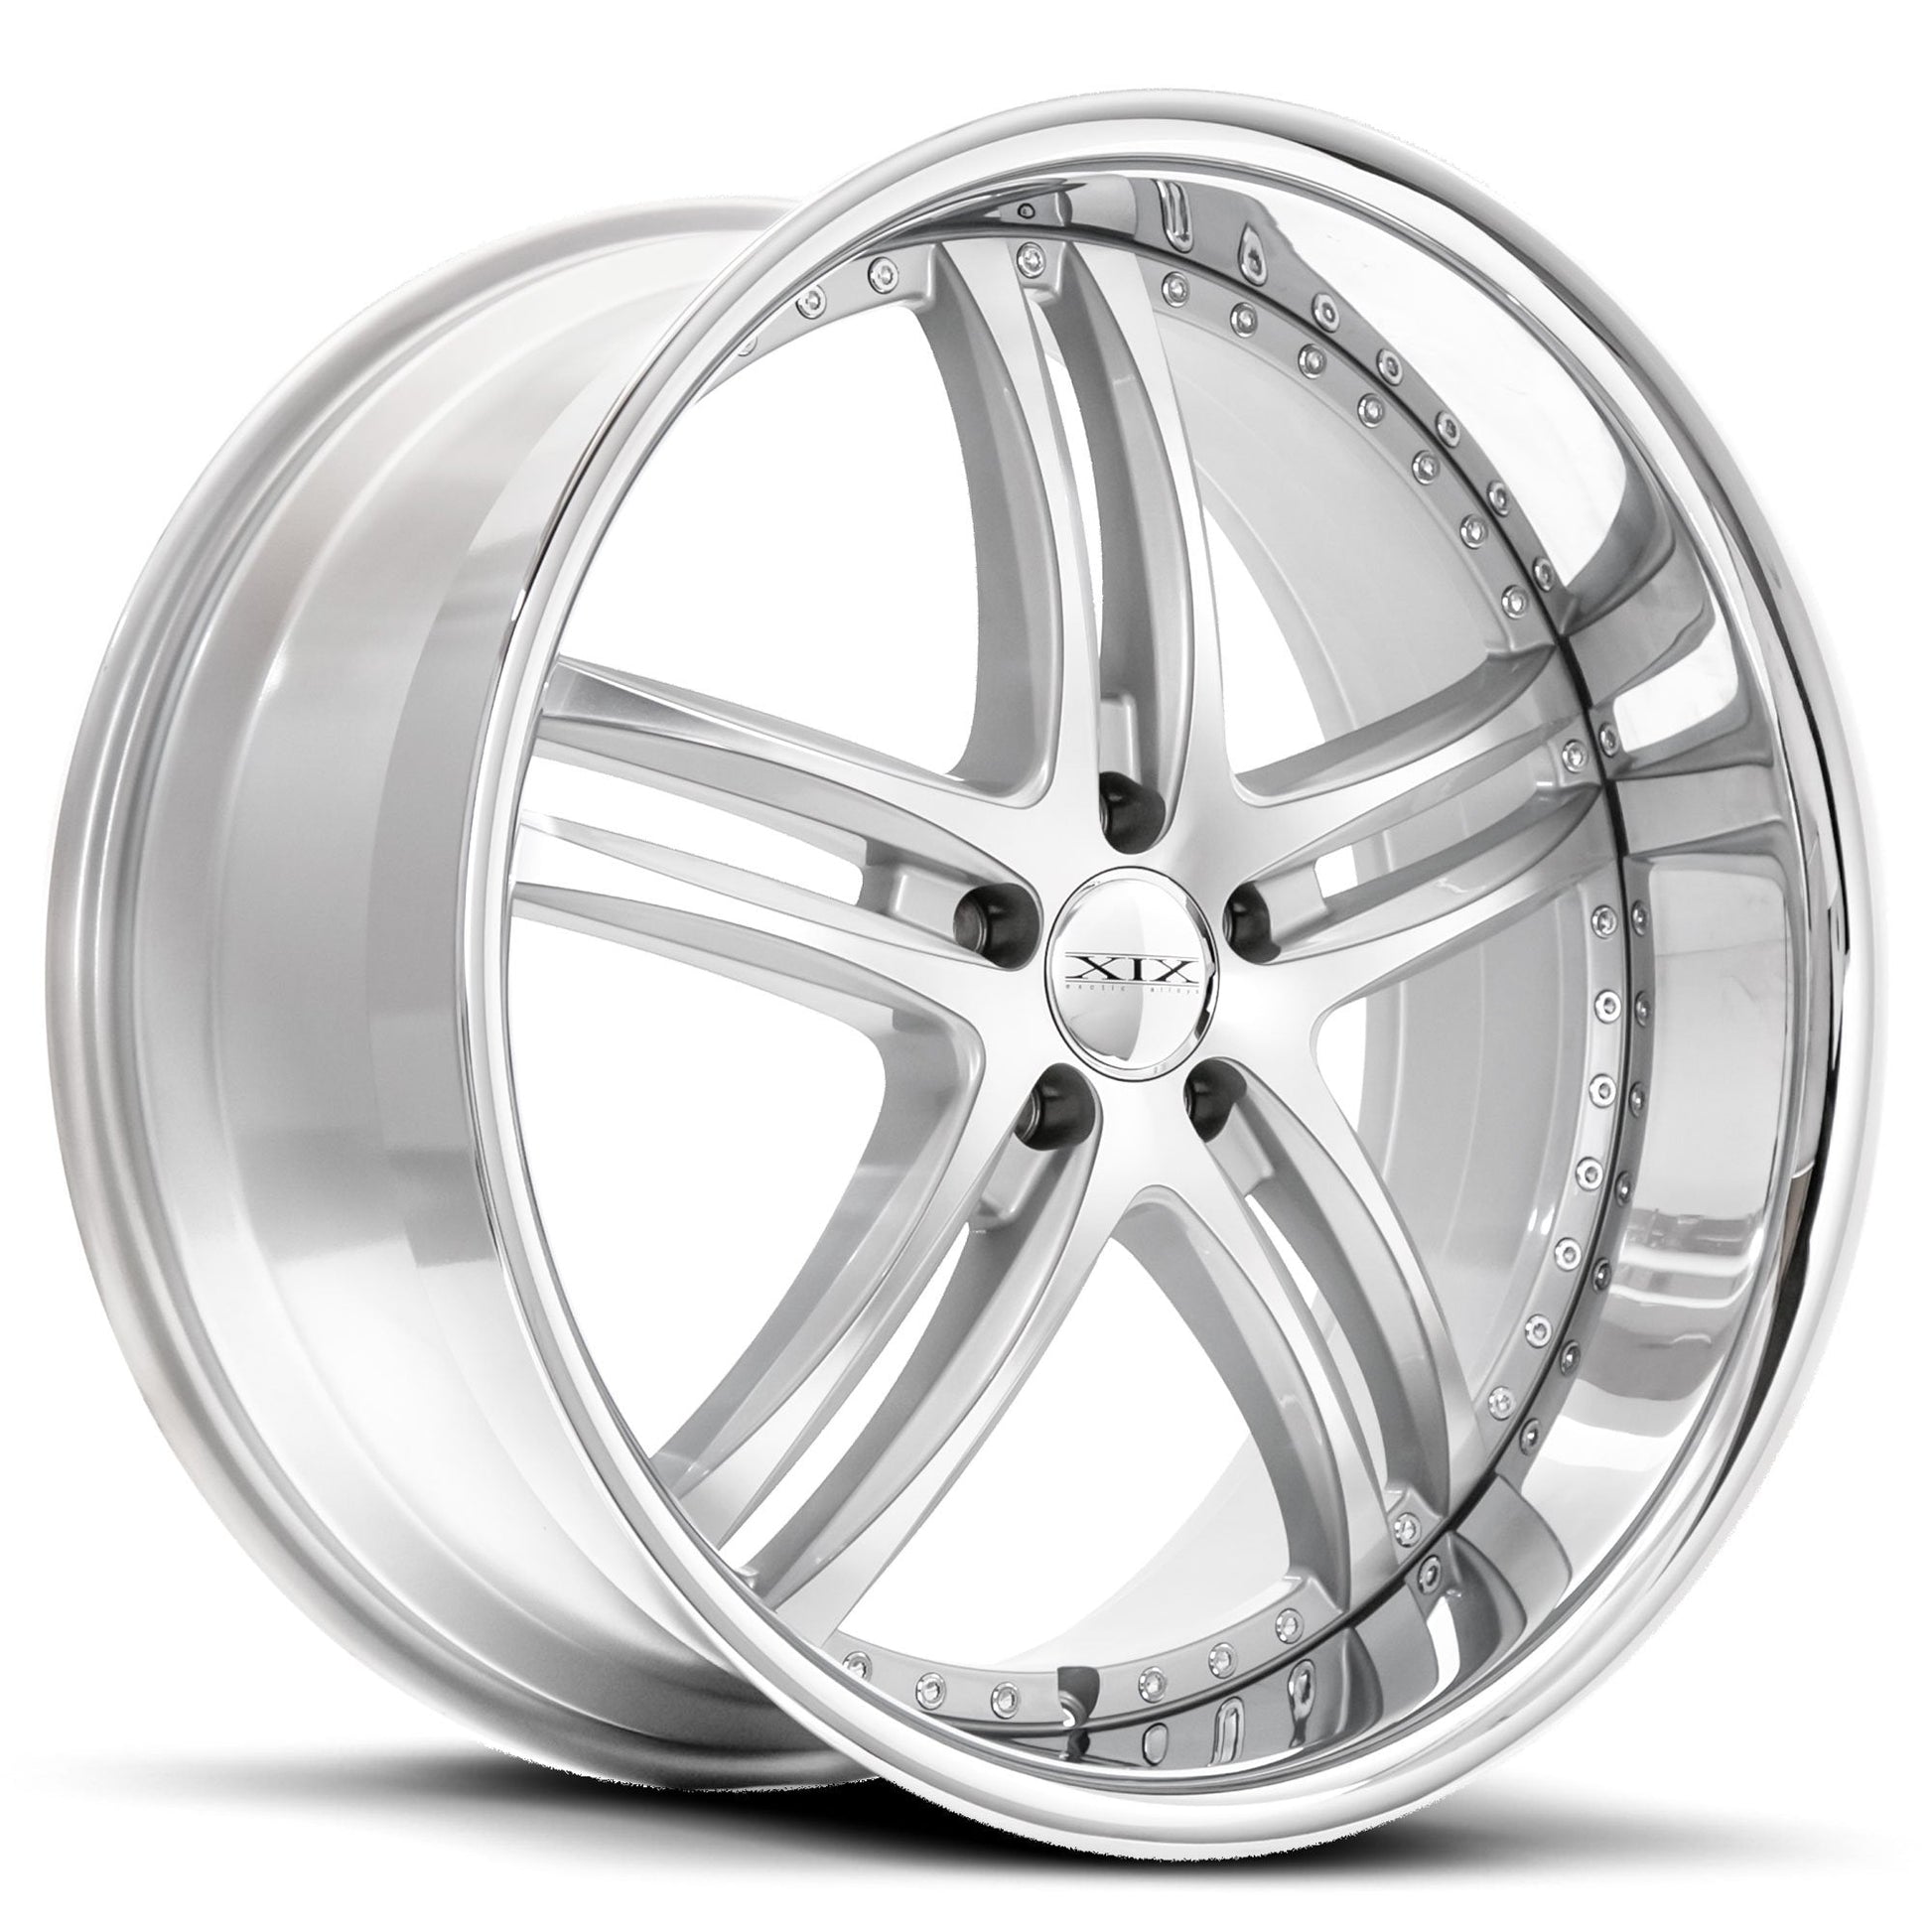 XIX-X15-Silver-Machined-with-Stainless-Steel-Lip-Silver-20x10-66.56-wheels-rims-felger-Felghuset